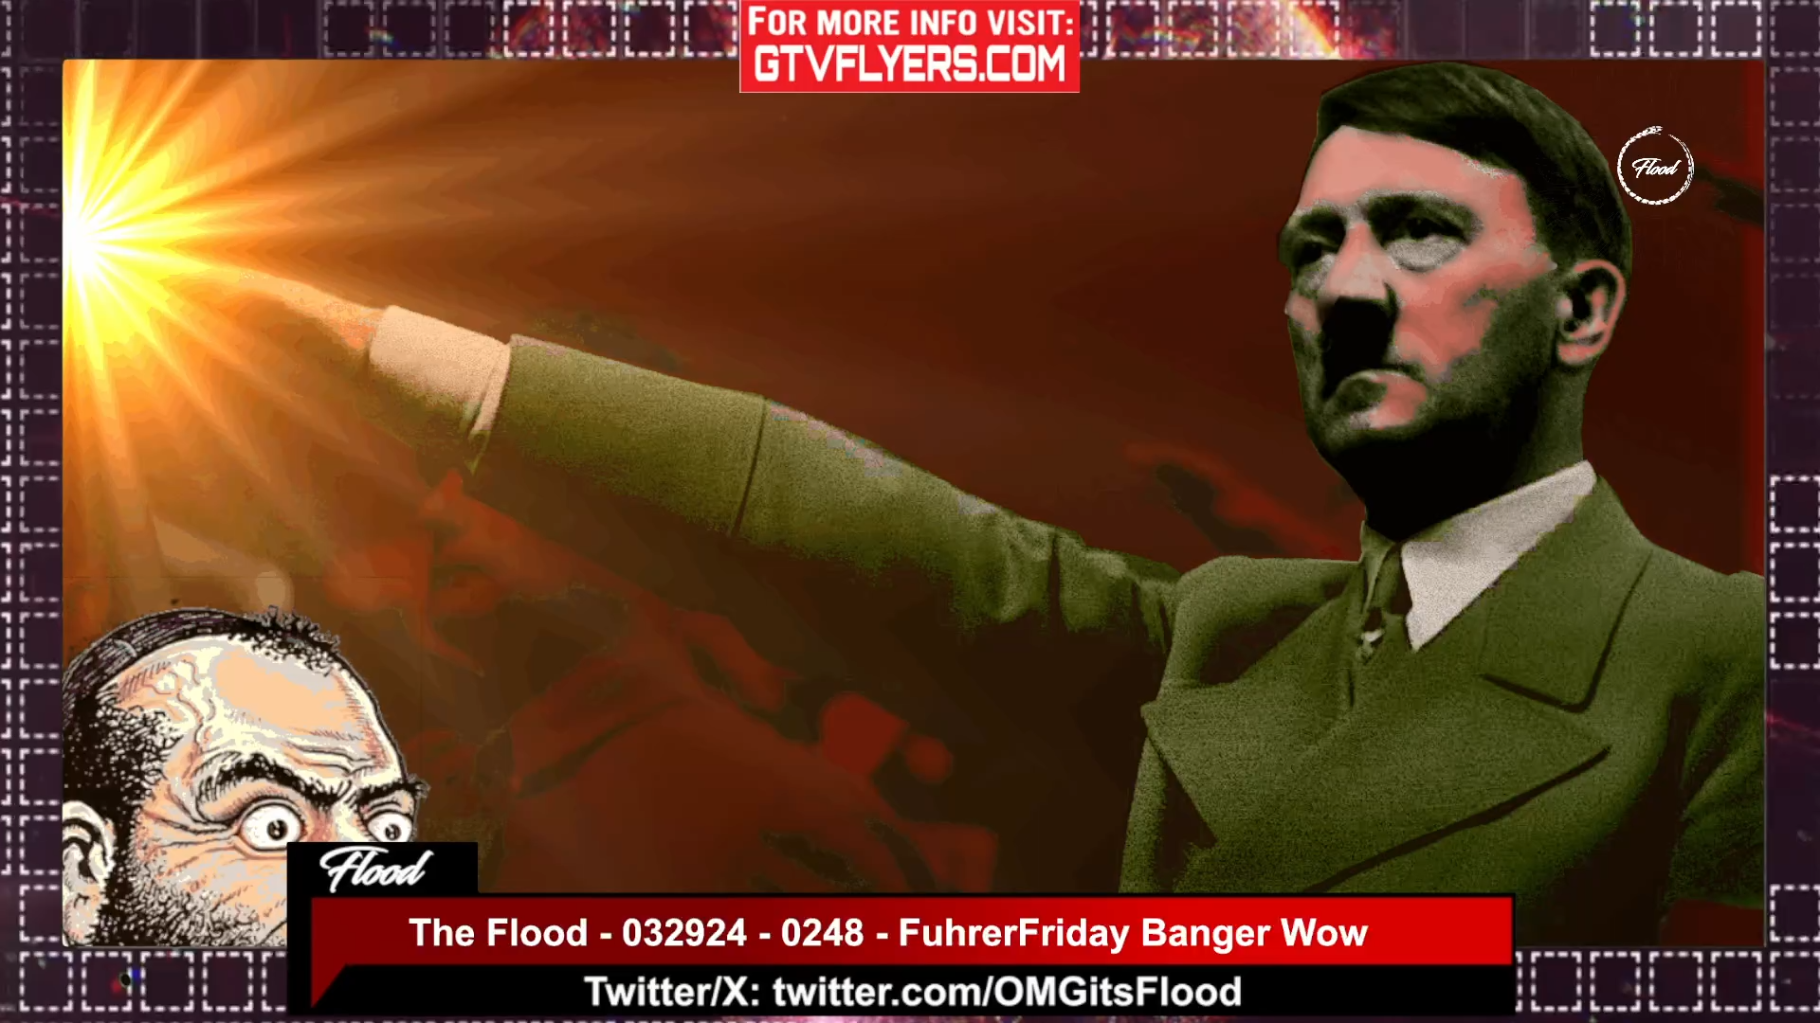 ⁣Live in 27 minutes The Flood - 032924 - 0248 - FuhrerFriday Banger Wow